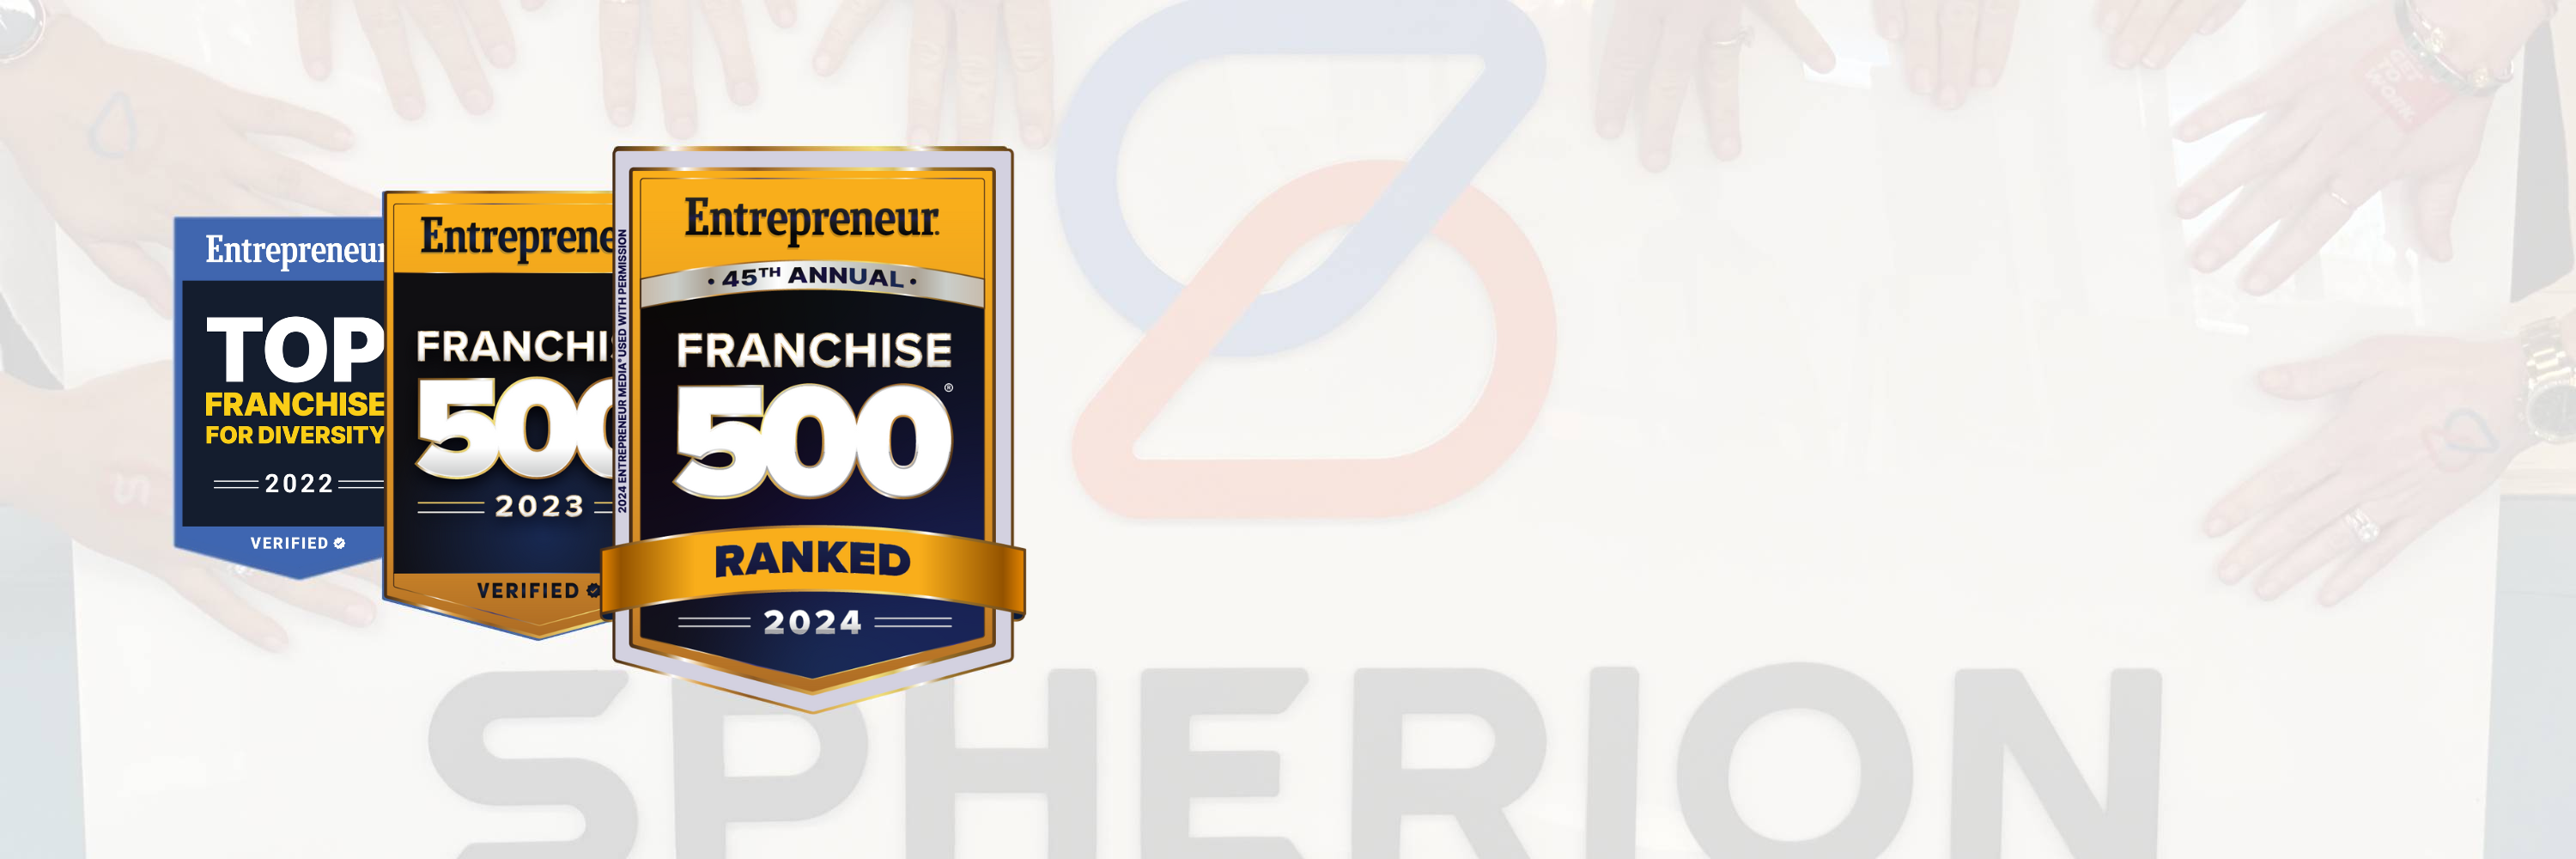 Three Entrepreneur 500 Ranked logos in succession ending with 2024 - Spherion Franchise Opportunity